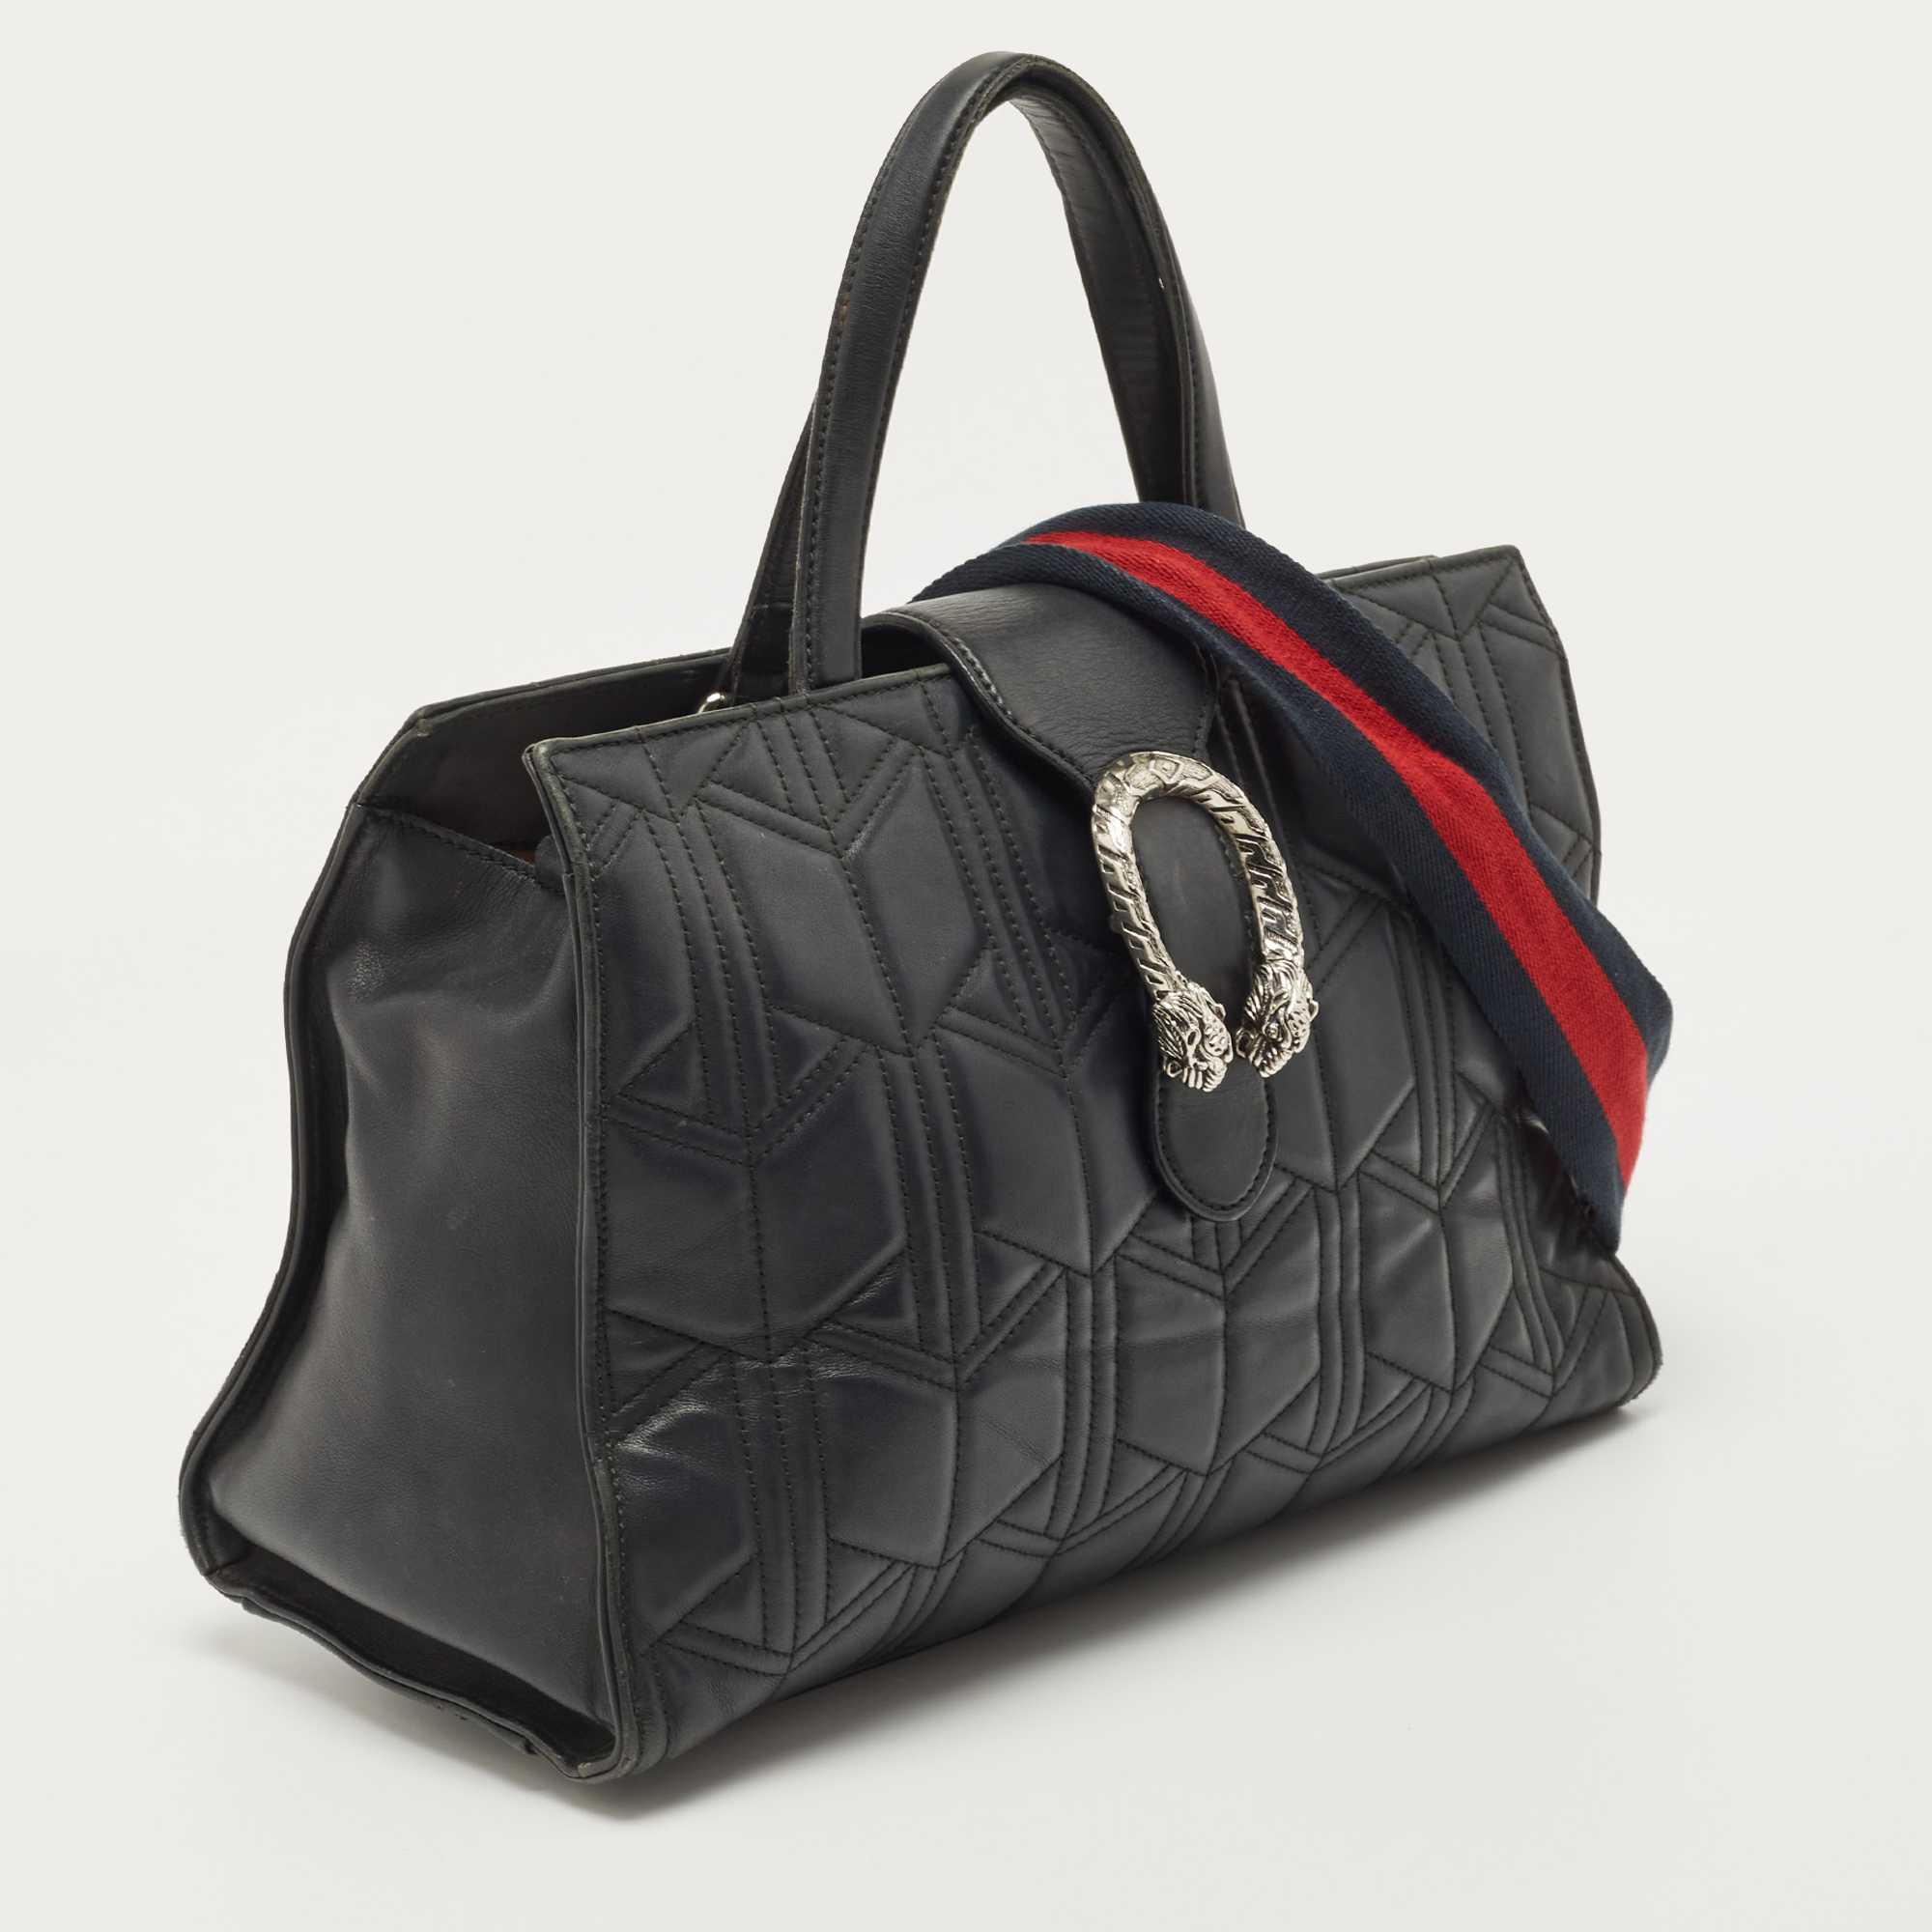 Gucci Black Quilted Leather Dionysus Flap Tote